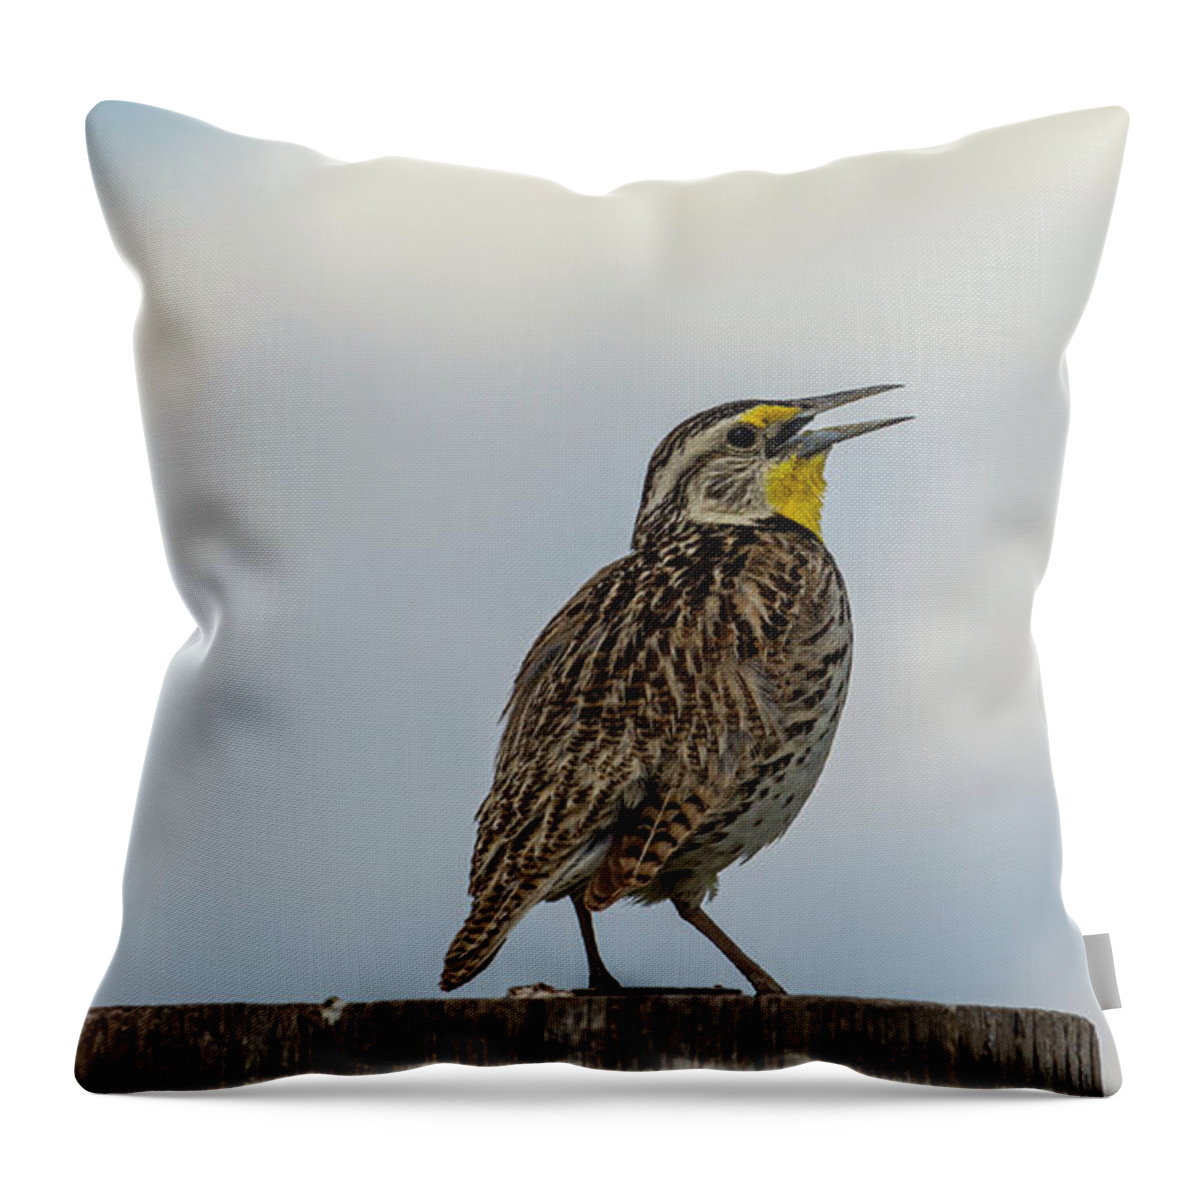 Western Meadowlark Throw Pillow featuring the photograph Western Meadowlark 2014 by Thomas Young